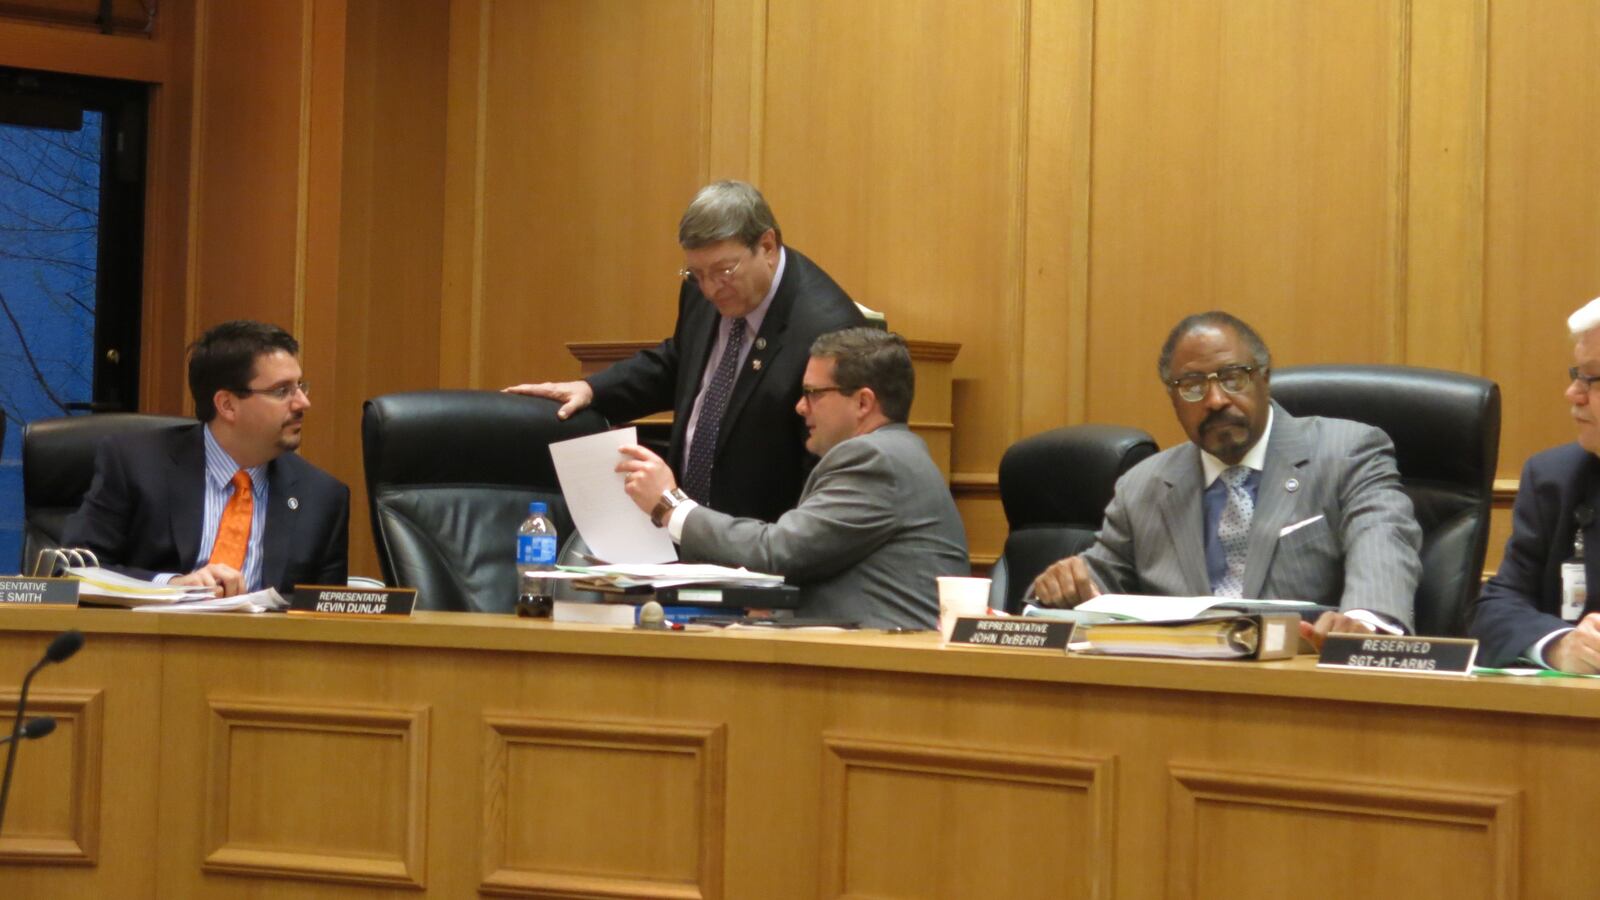 Rep. Harry Brooks (R-Knoxville) and Rep. Kevin Dunlap (D-Rock Island) discuss legislation prior to a House education panel on Tuesday. Lawmakers are discussing numerous bills related to Tennessee's Common Core State Standards.